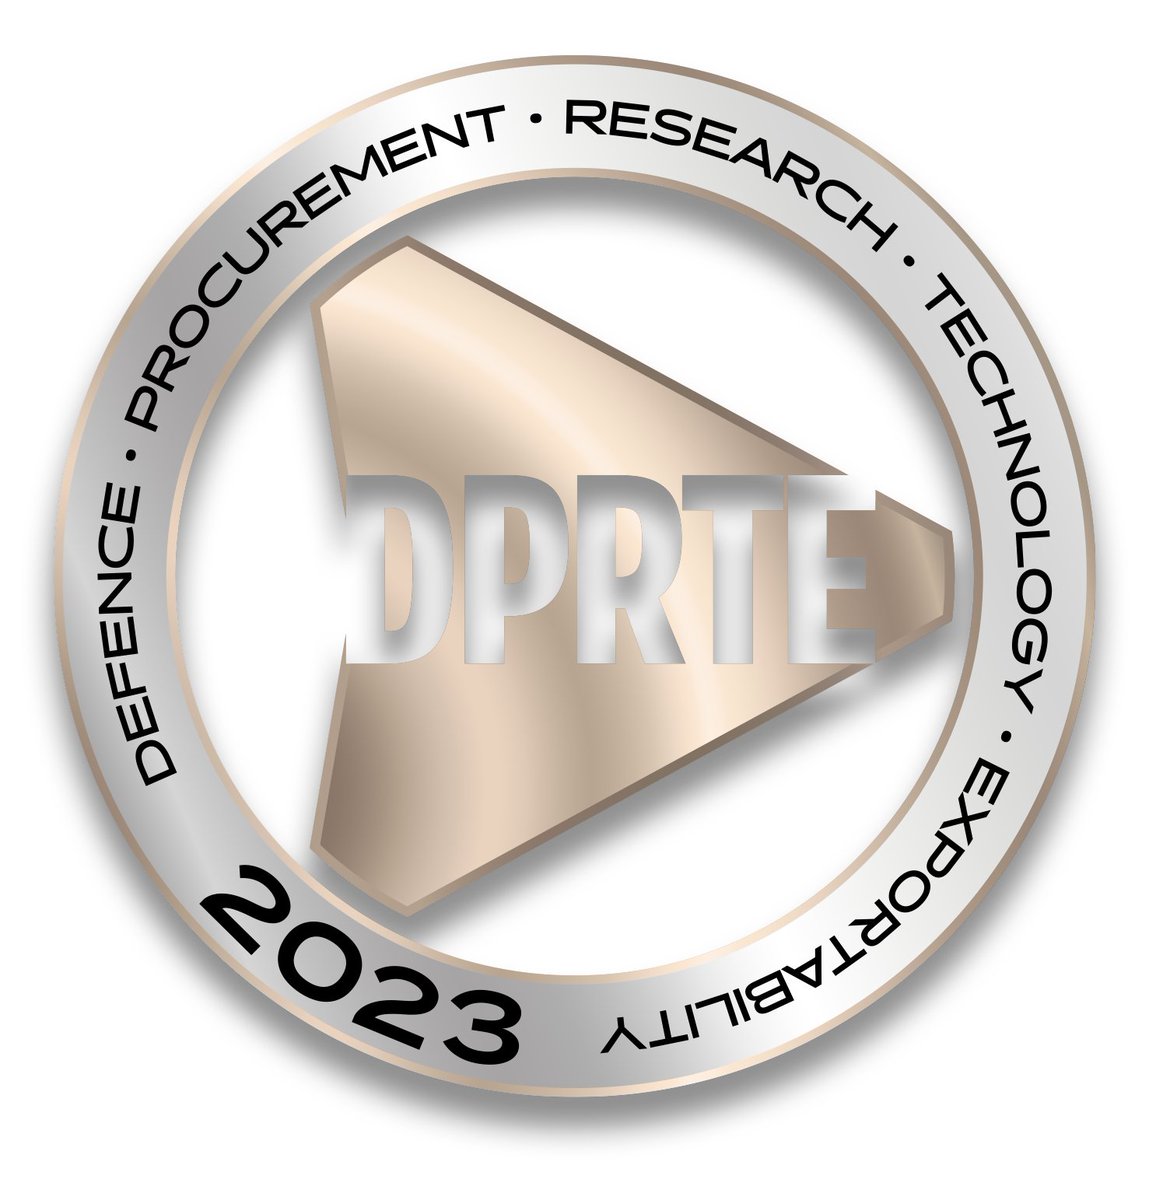 .@MODdigitalHQ has now officially joined the UK’s leading defence procurement and supply chain event, @DPRTE 2023 which is taking place at the Farnborough International on 29 March. FInd out more here: dprte.co.uk/book-now/ #DPRTE